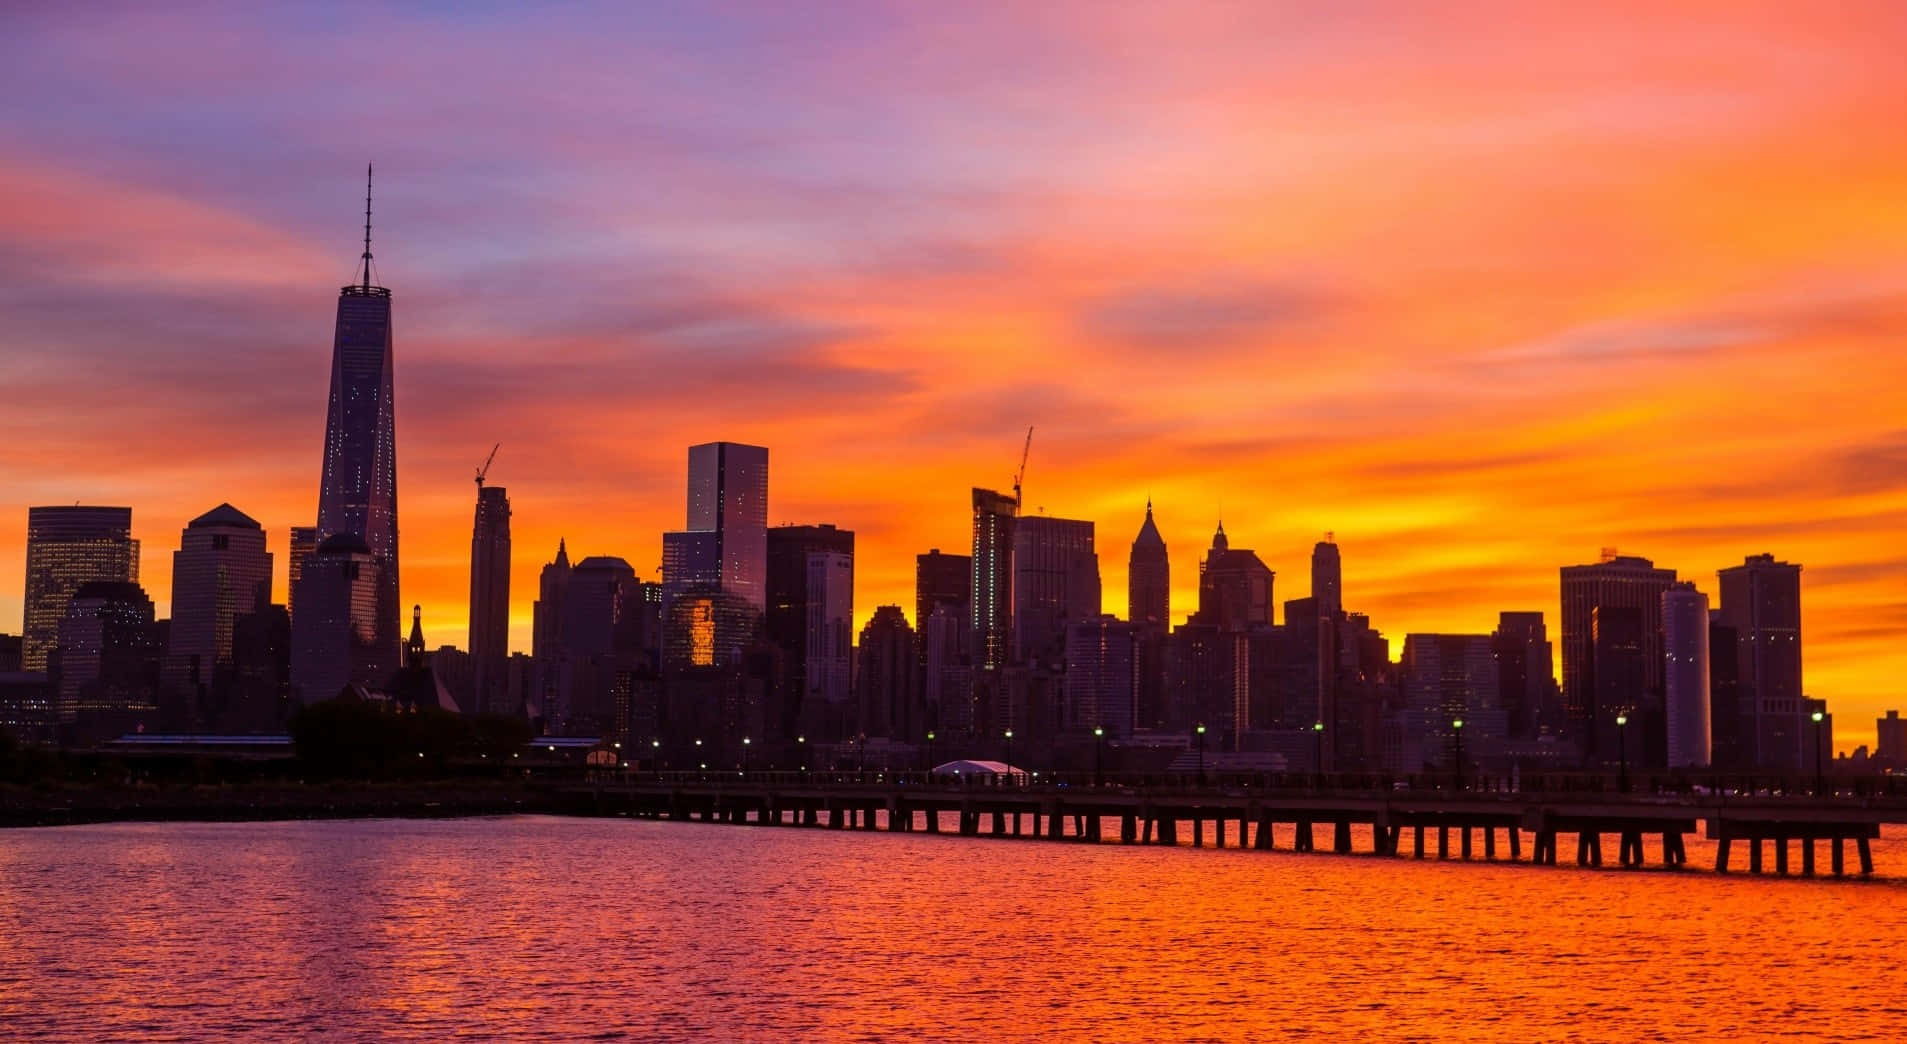 Take in the incredible skyline of NYC